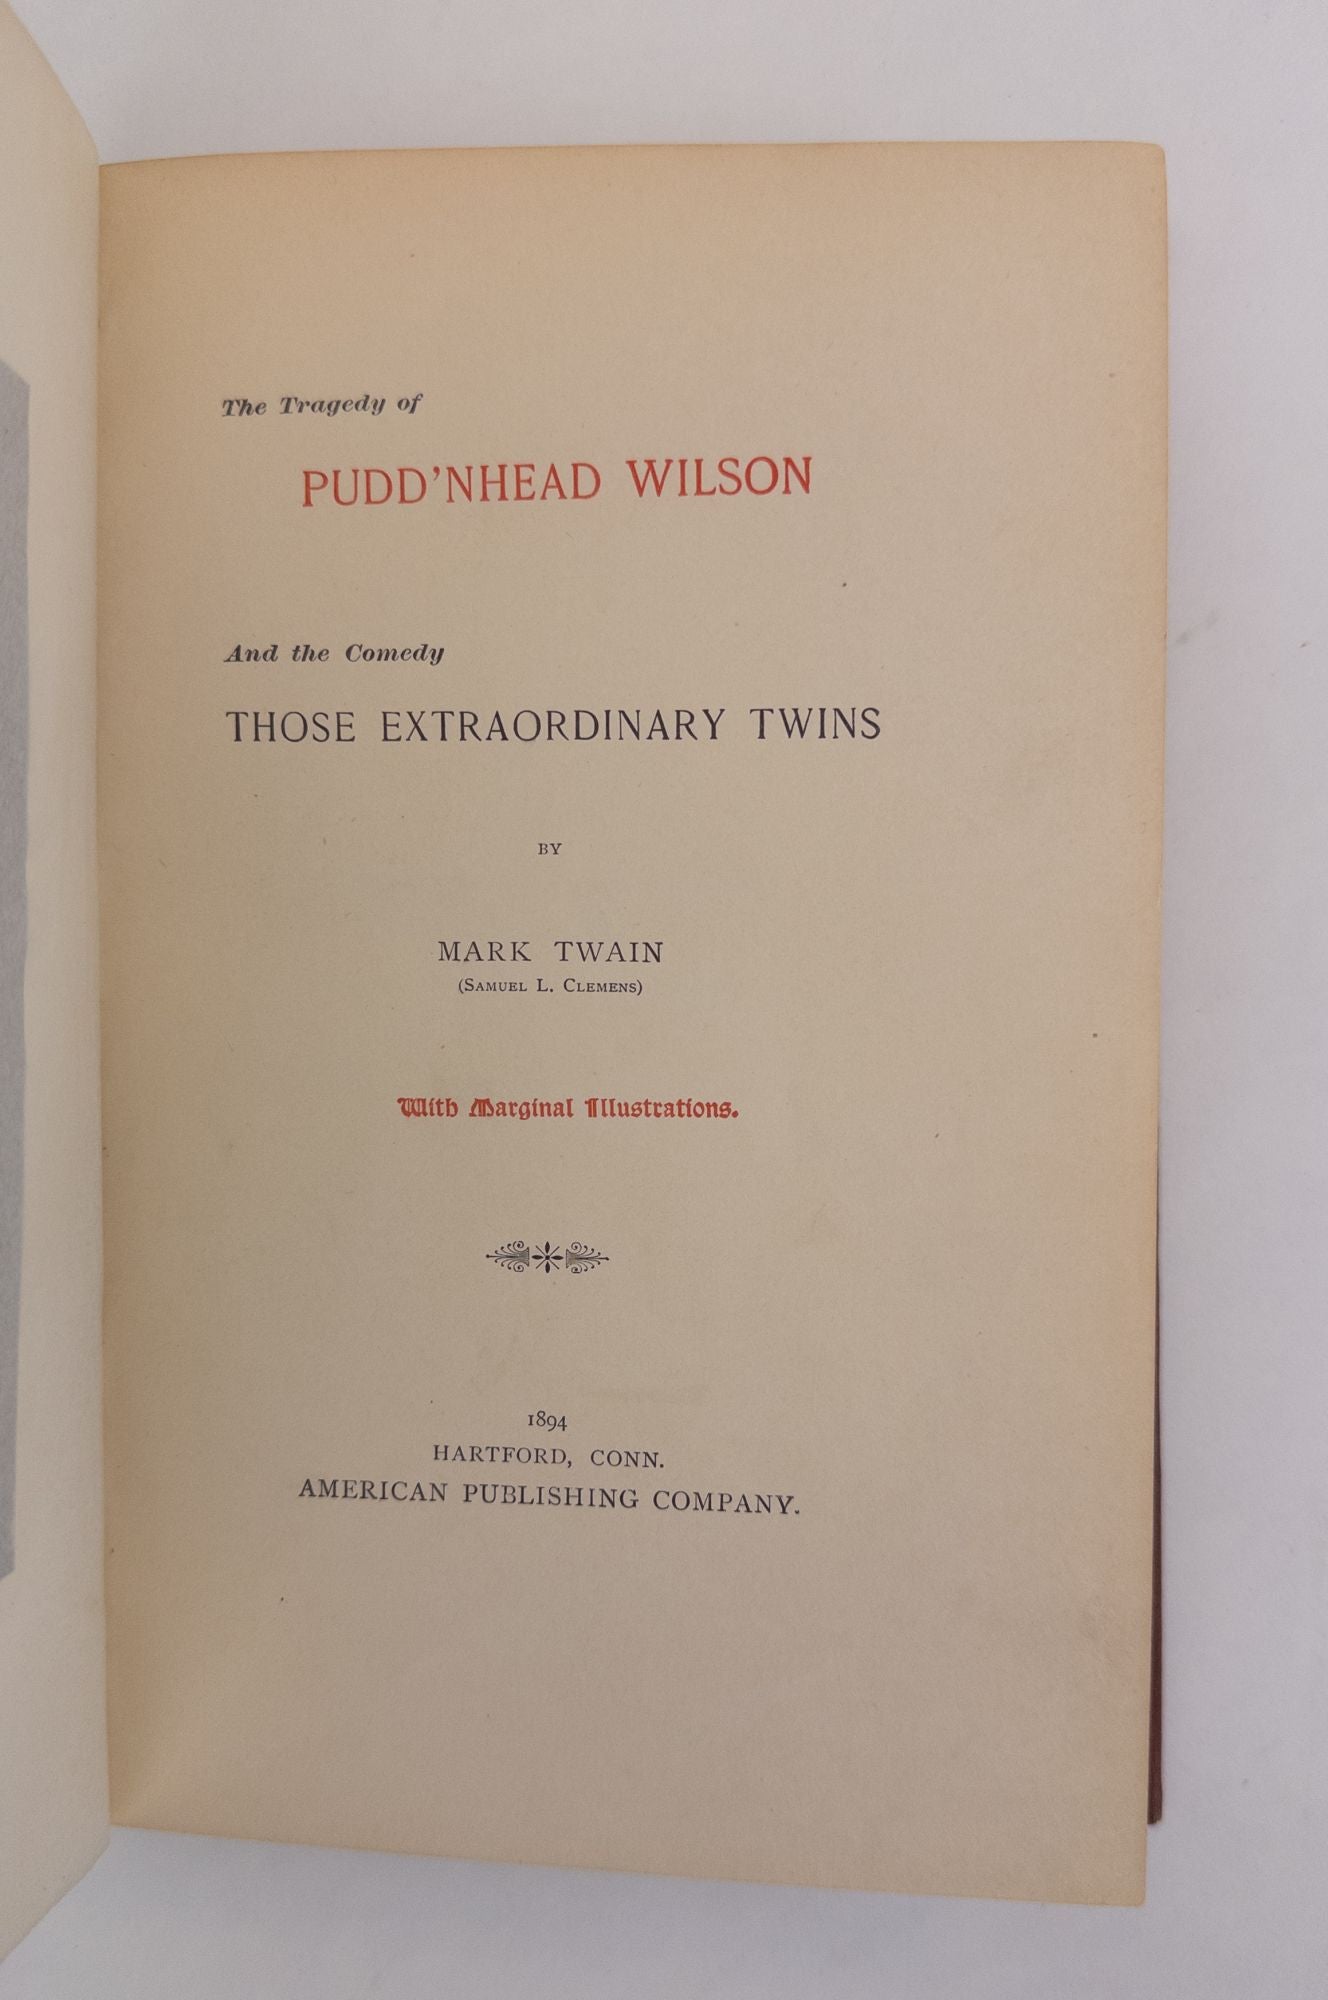 Product Image for THE TRAGEDY OF PUDD'NHEAD WILSON AND THE COMEDY OF THOSE EXTRAORDINARY TWINS